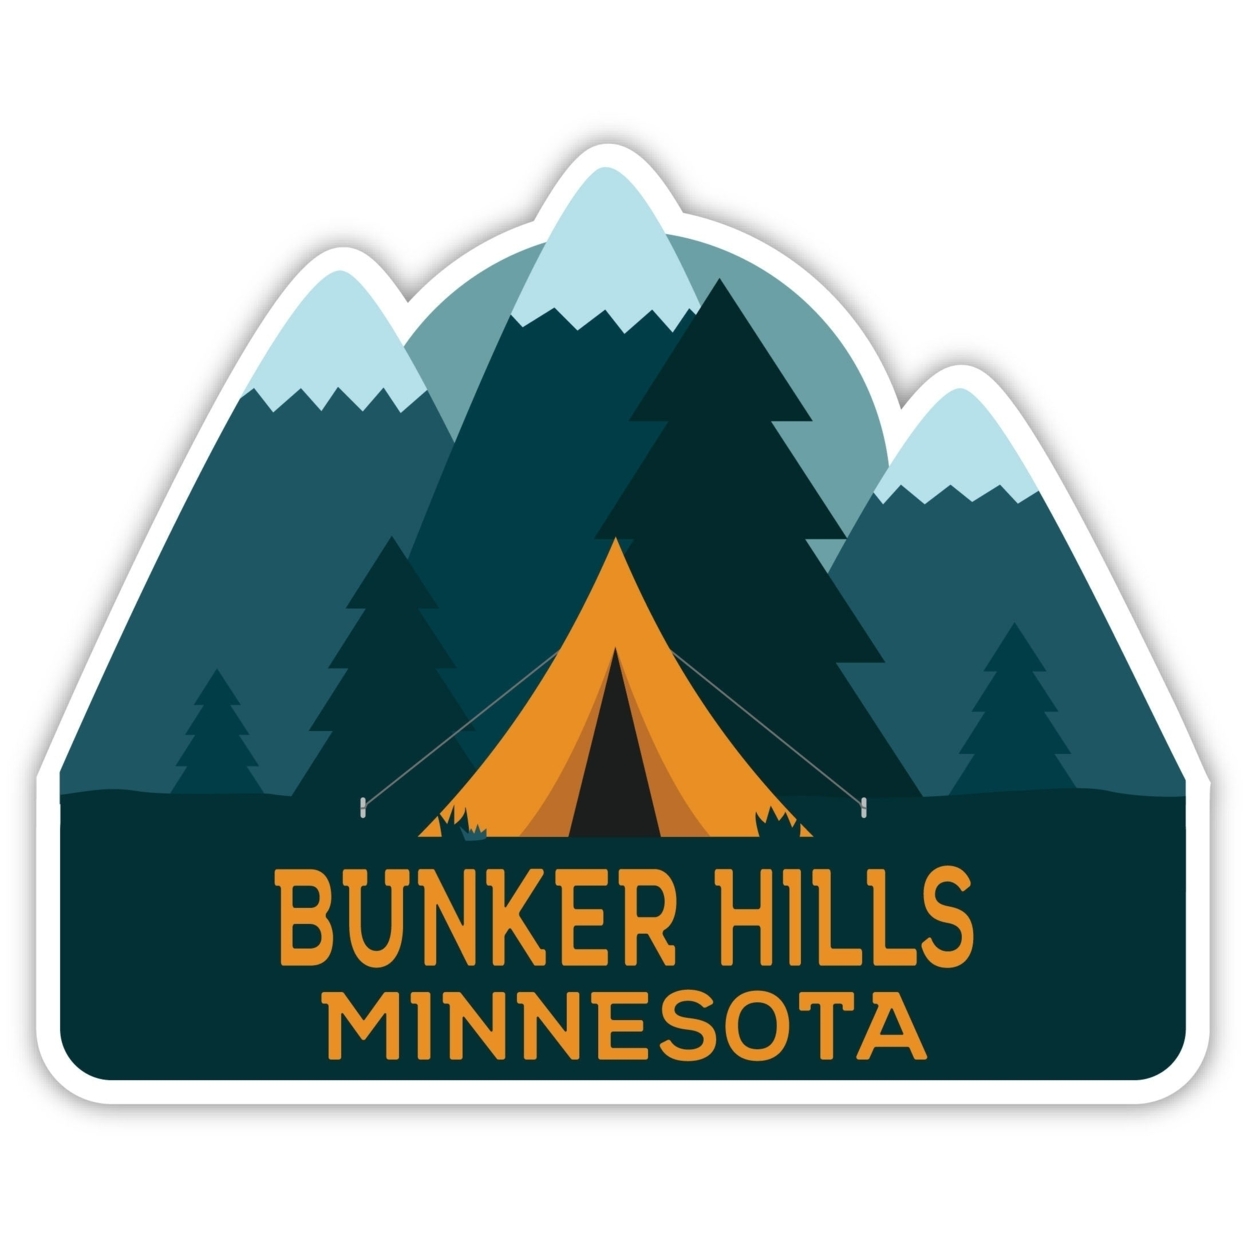 Bunker Hills Minnesota Souvenir Decorative Stickers (Choose Theme And Size) - 4-Pack, 4-Inch, Tent